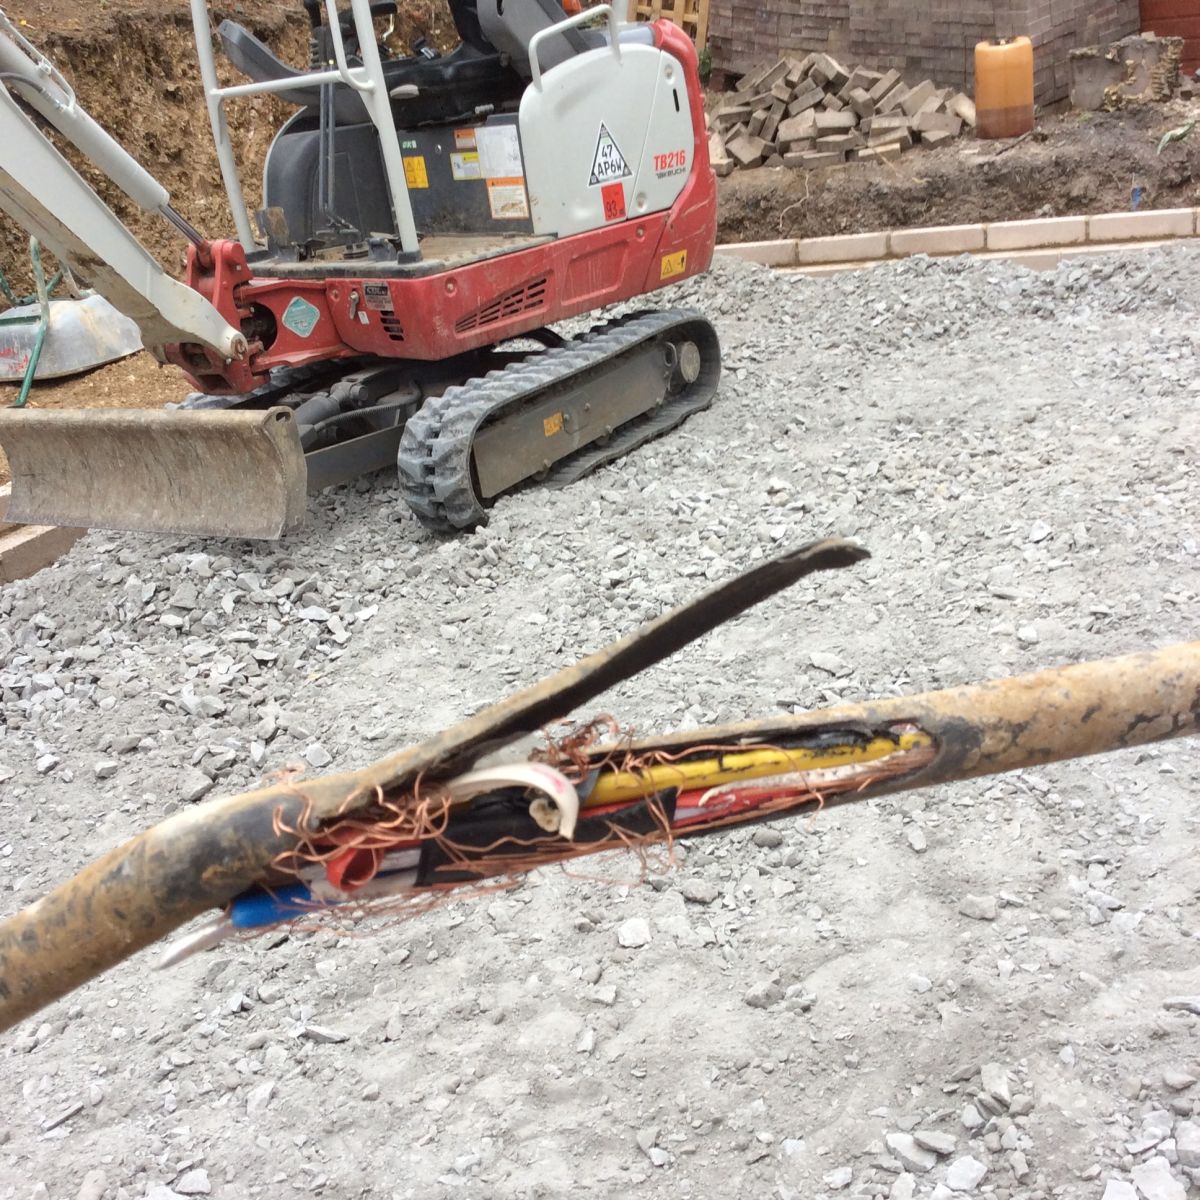 Digger excavated and damaged cable causing blackout